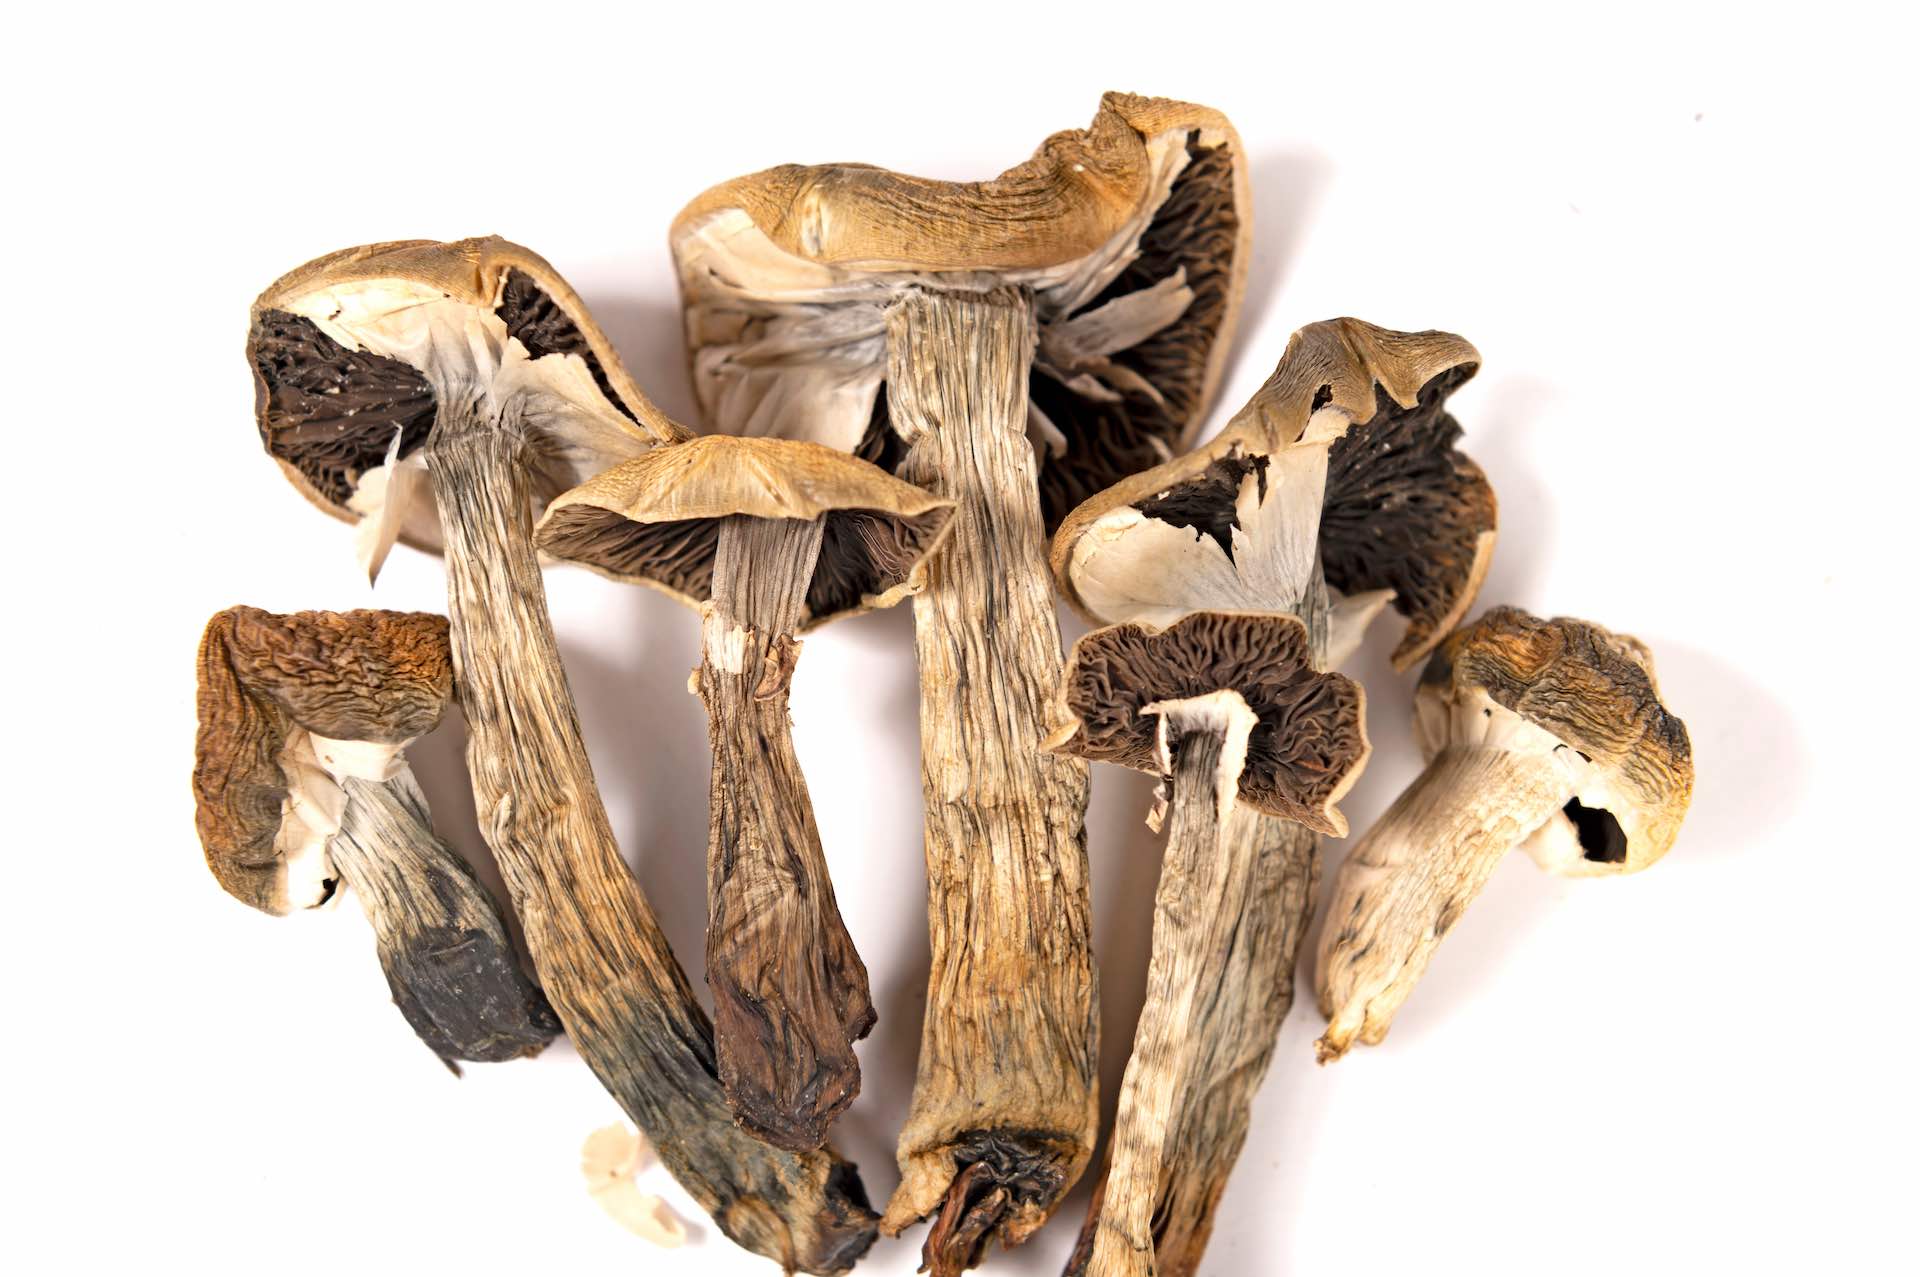 How to safely dry and store psychedelic mushrooms